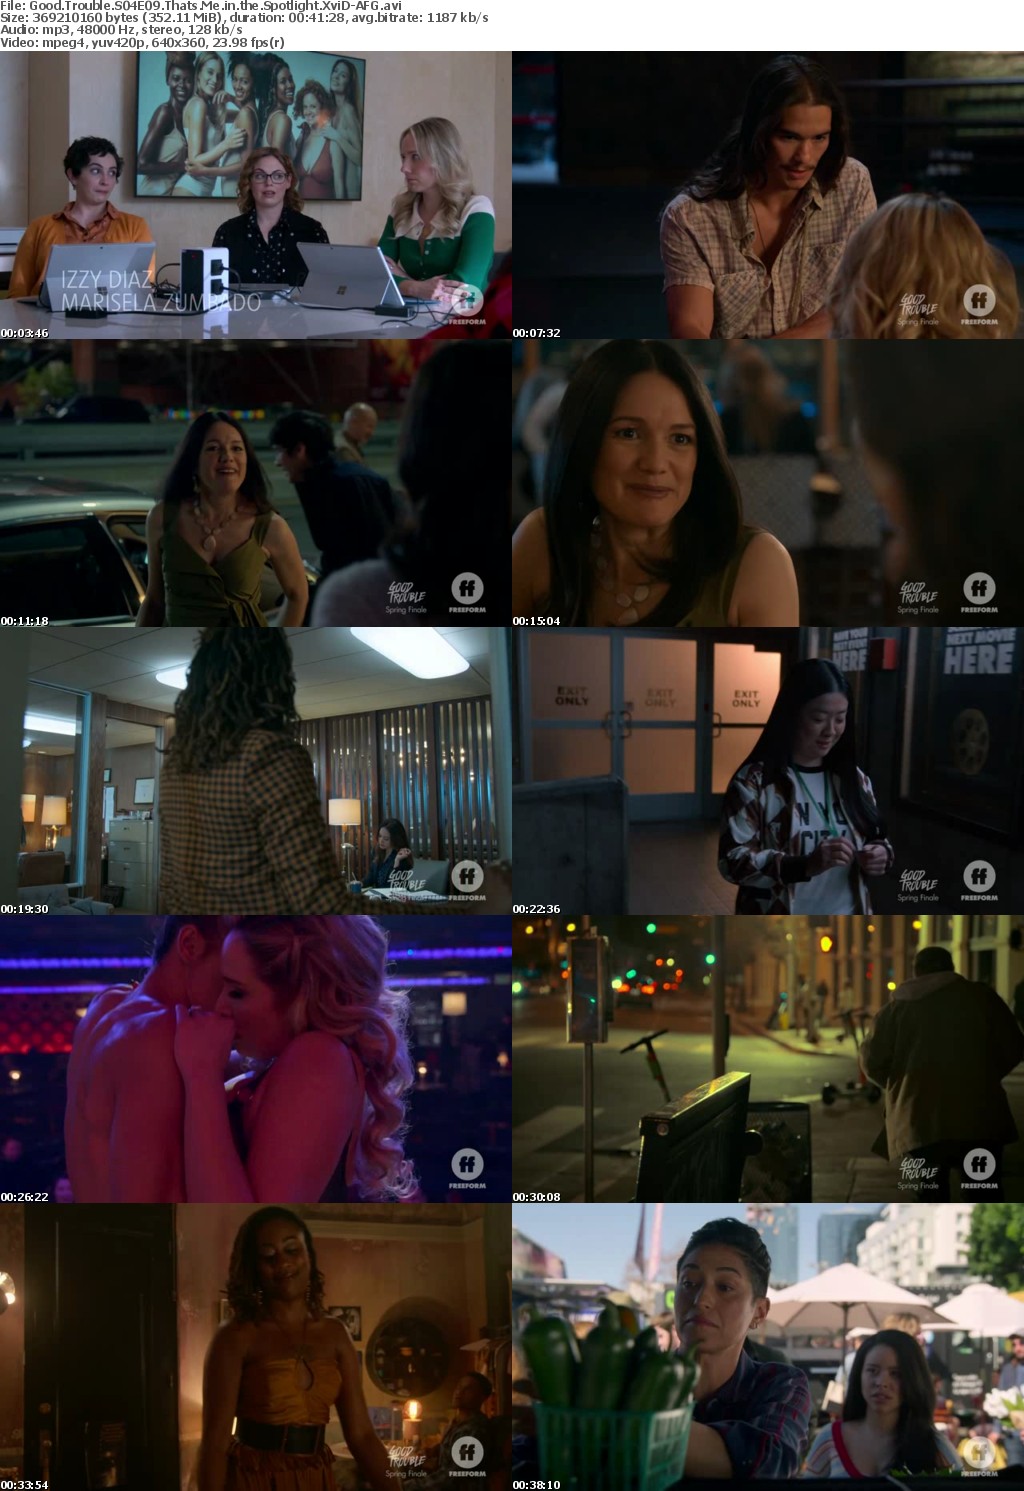 Good Trouble S04E09 Thats Me in the Spotlight XviD-AFG